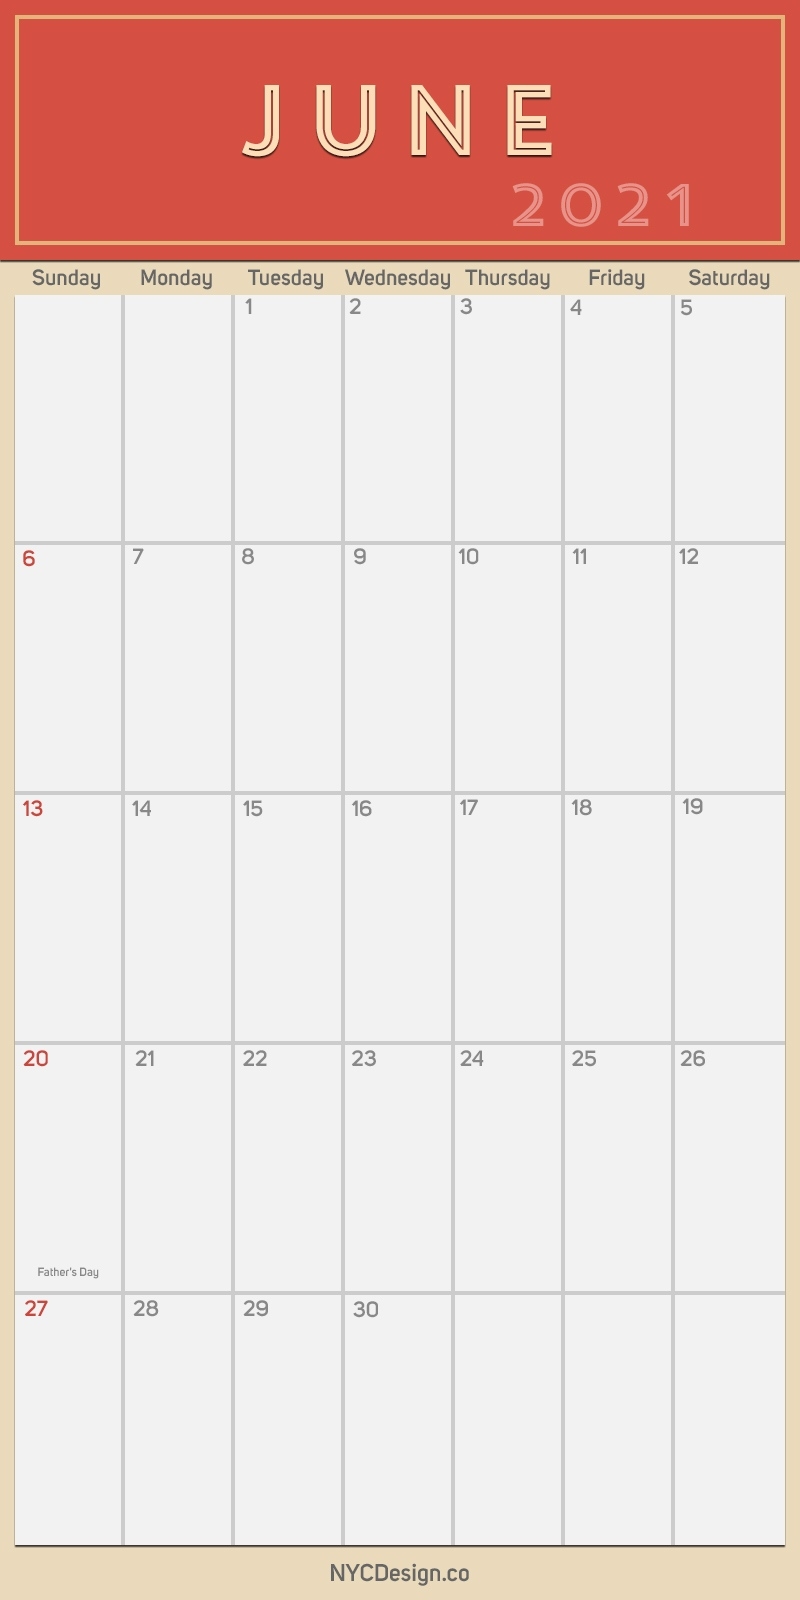 2021 June - Monthly Calendar With Holidays, Printable Free, Pdf - Sunday Start - Nycdesign.co June 2021 Calendar Monday Start